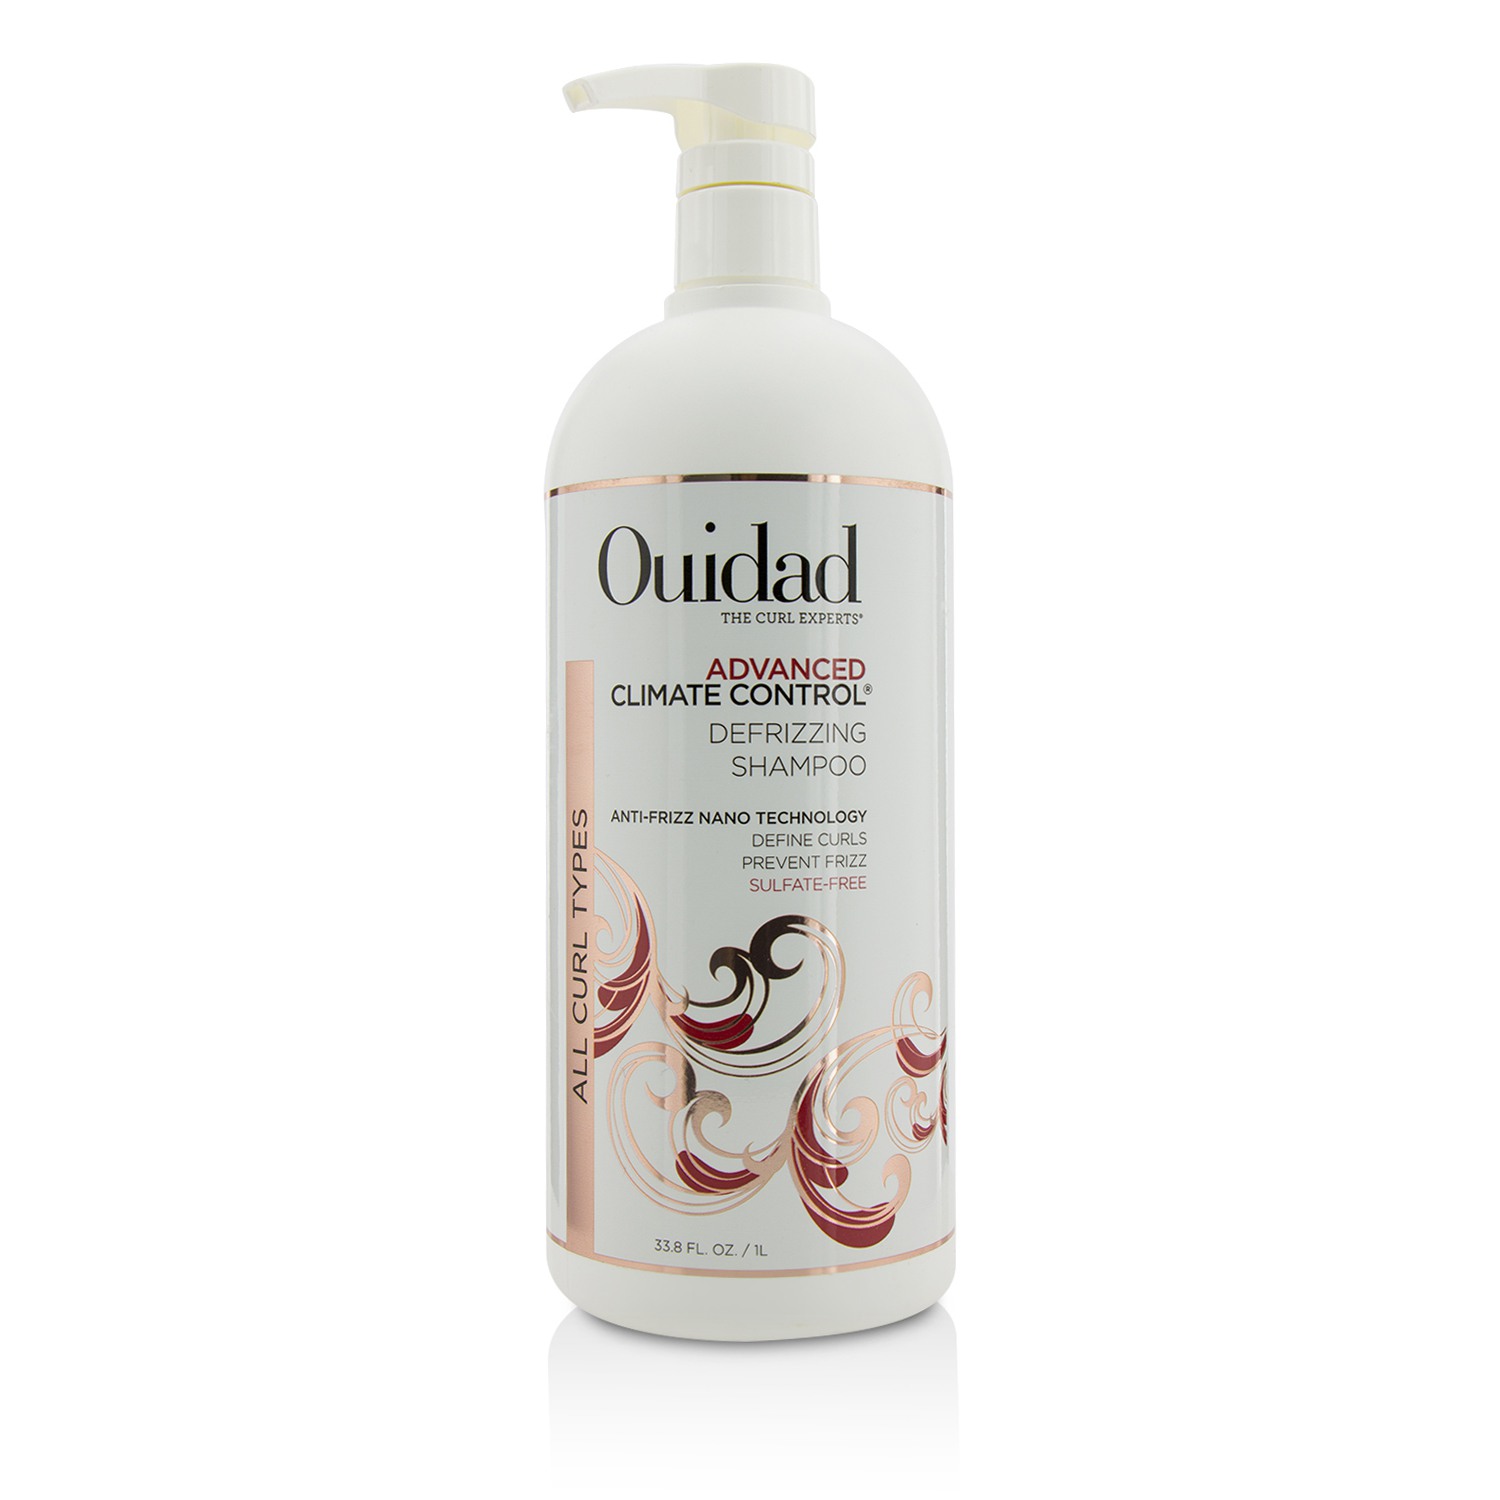 Advanced Climate Control Defrizzing Shampoo (All Curl Types) Ouidad Image